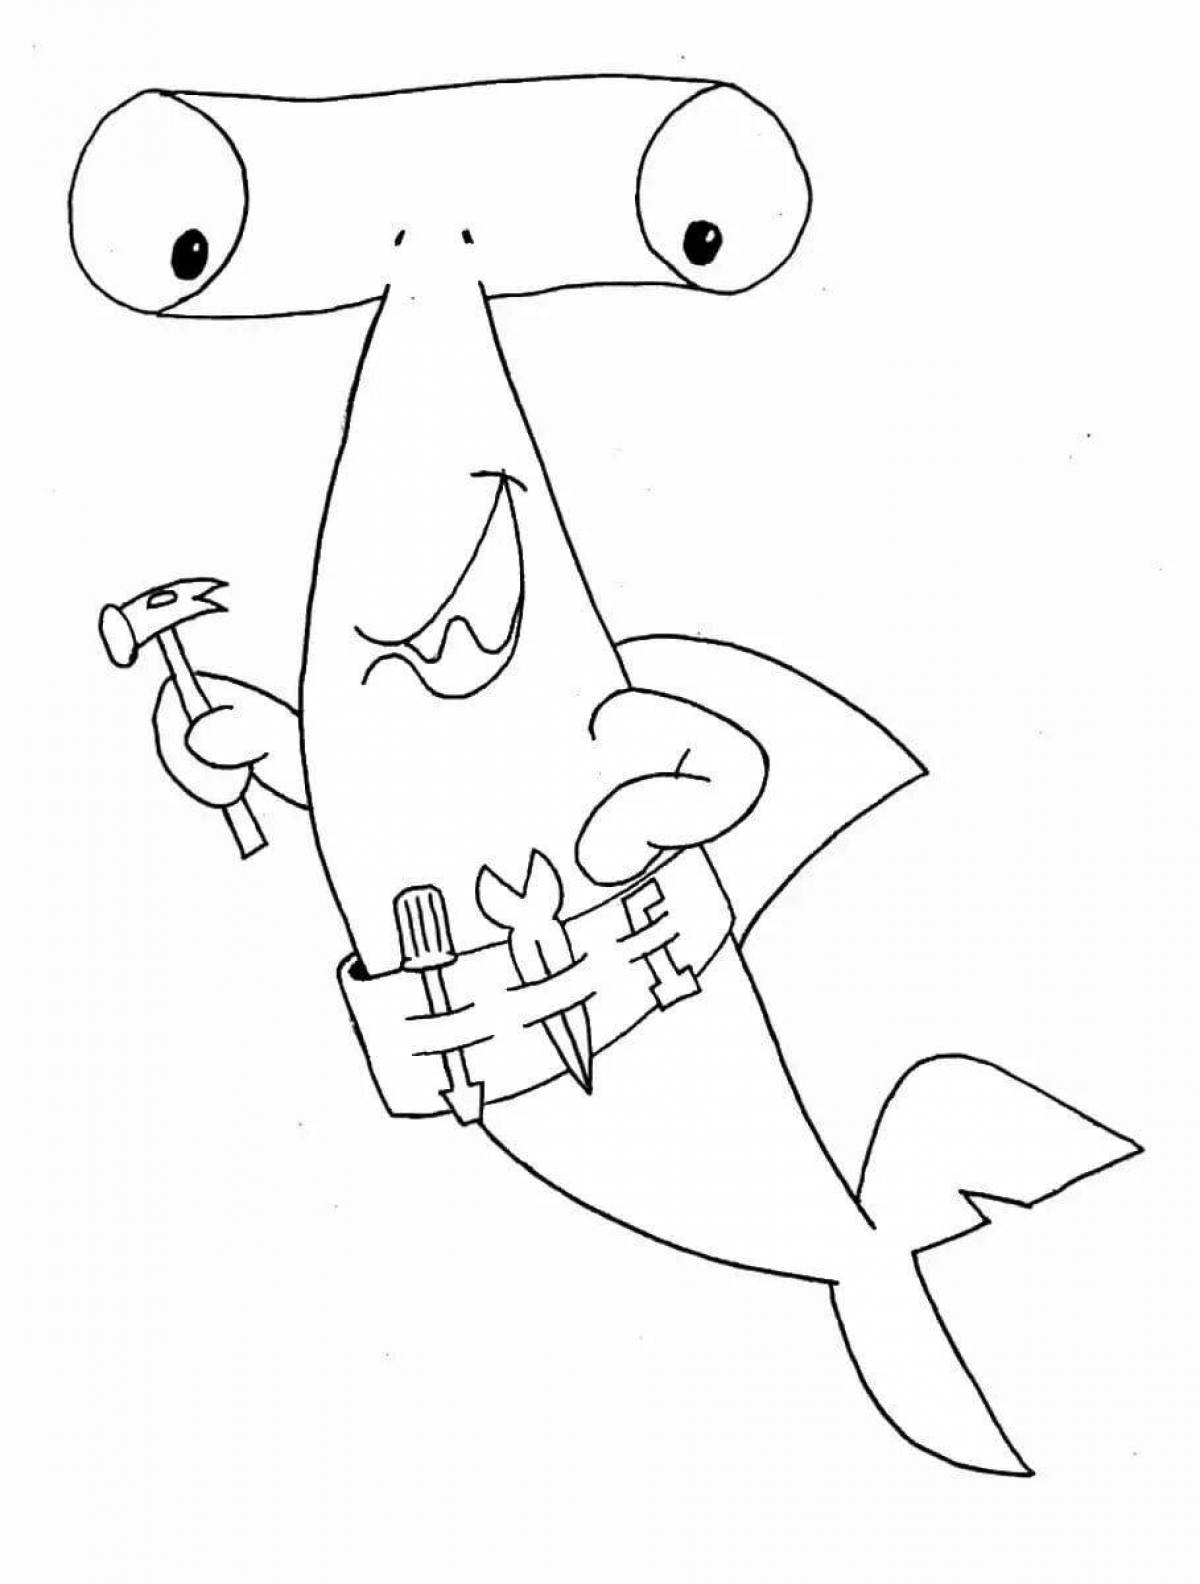 Sparkling hammerhead coloring page